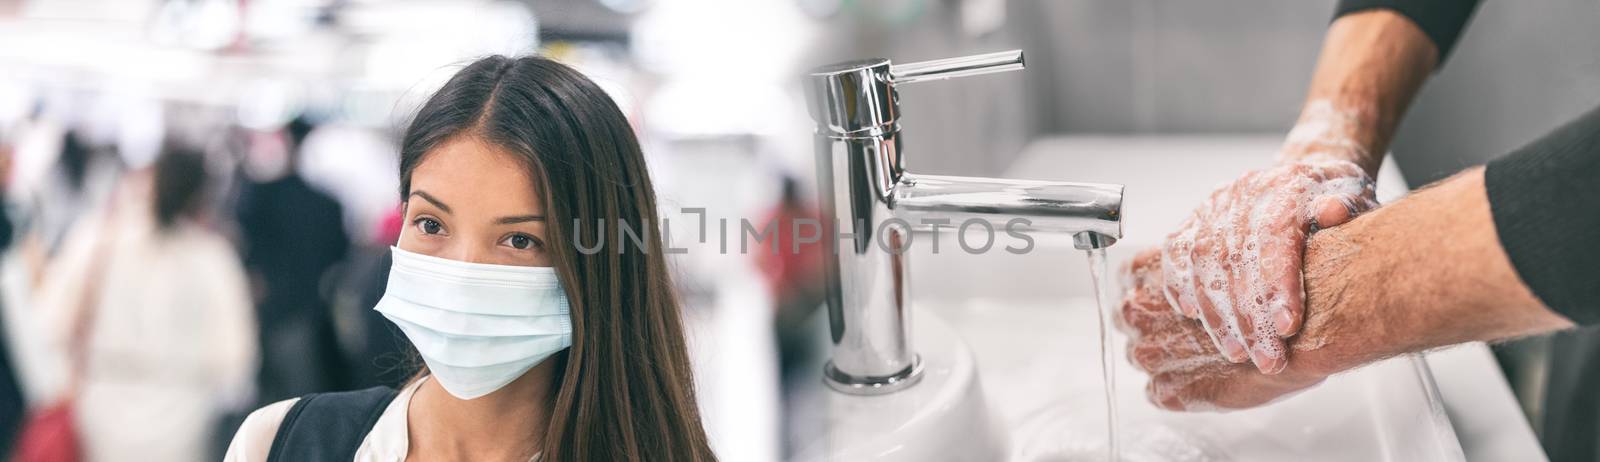 Coronavirus virus spreading prevention Asian chinese woman wearing face mask versus man washing hands in hot water rubbing in soap panoramic banner by Maridav